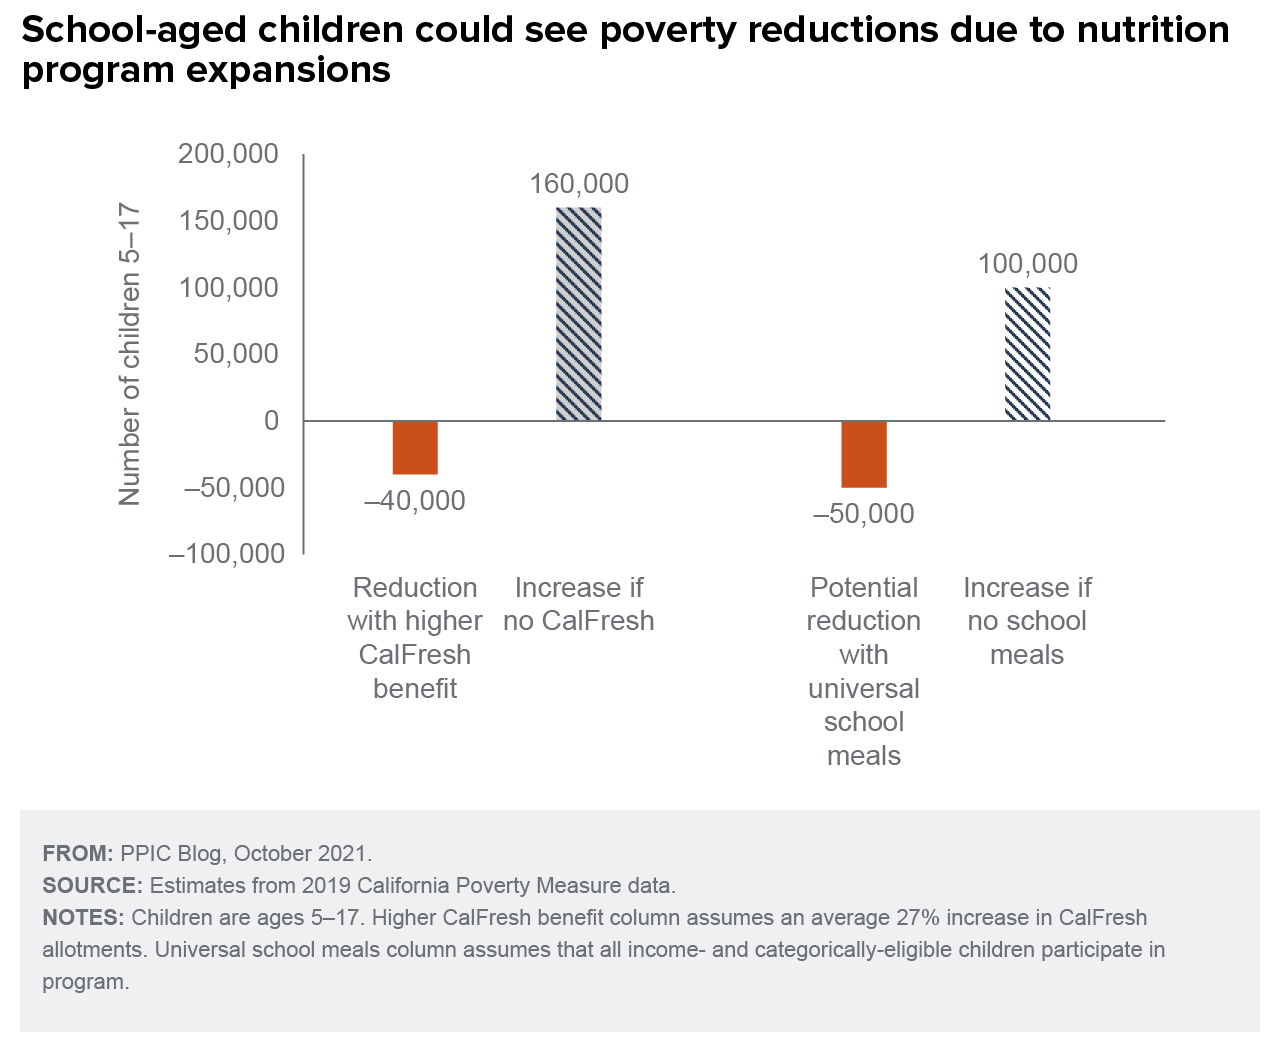 figure - School aged children could see poverty reductions due to nutrition program expansions